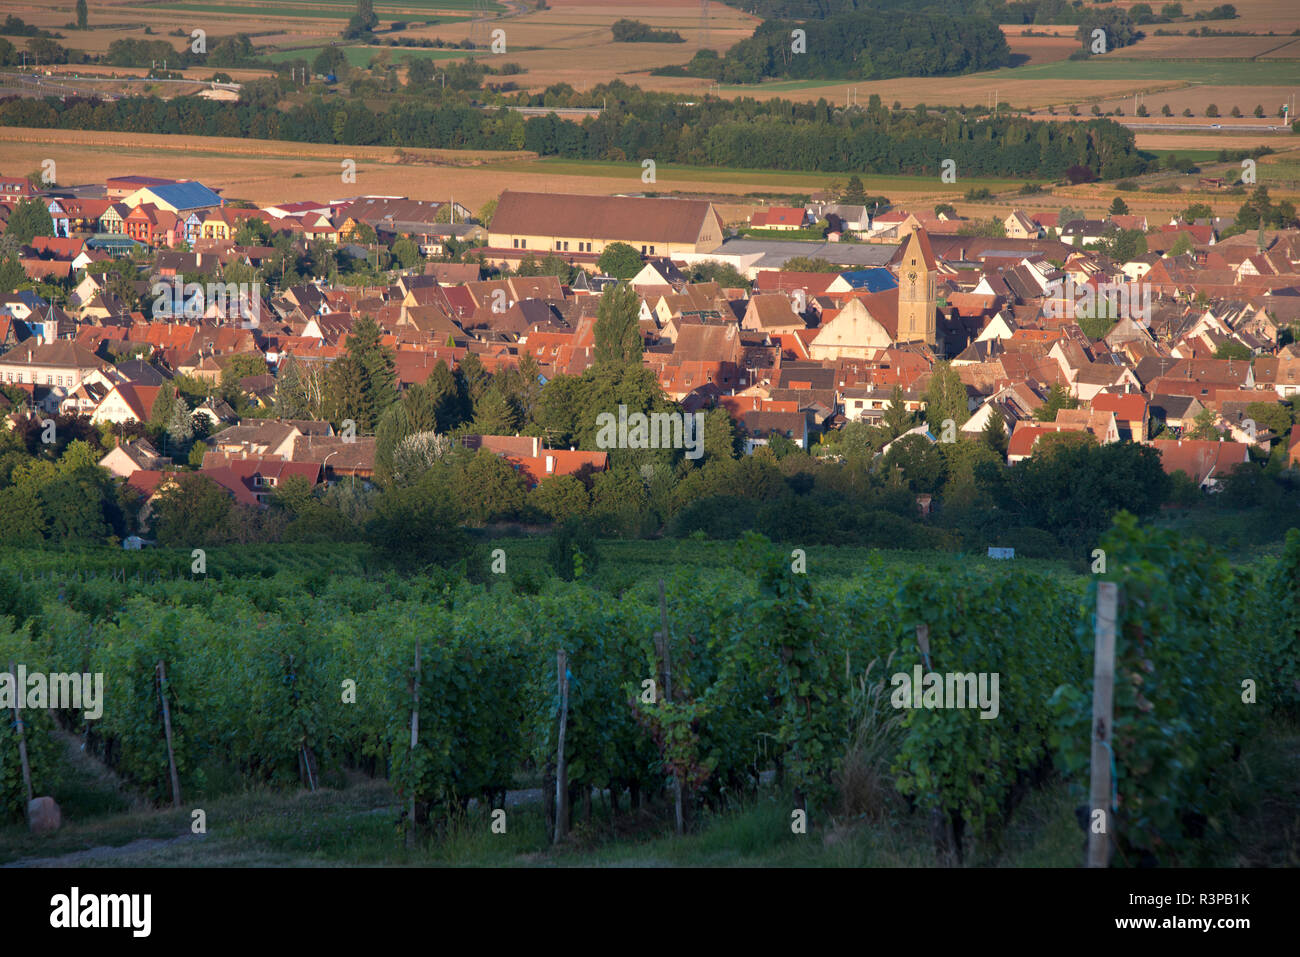 France, Alsace, Eguisheim. View of red roofed Eguisheim village, the birthplace of winegrowing in Alsace, seen from a hillside vineyard. Stock Photo